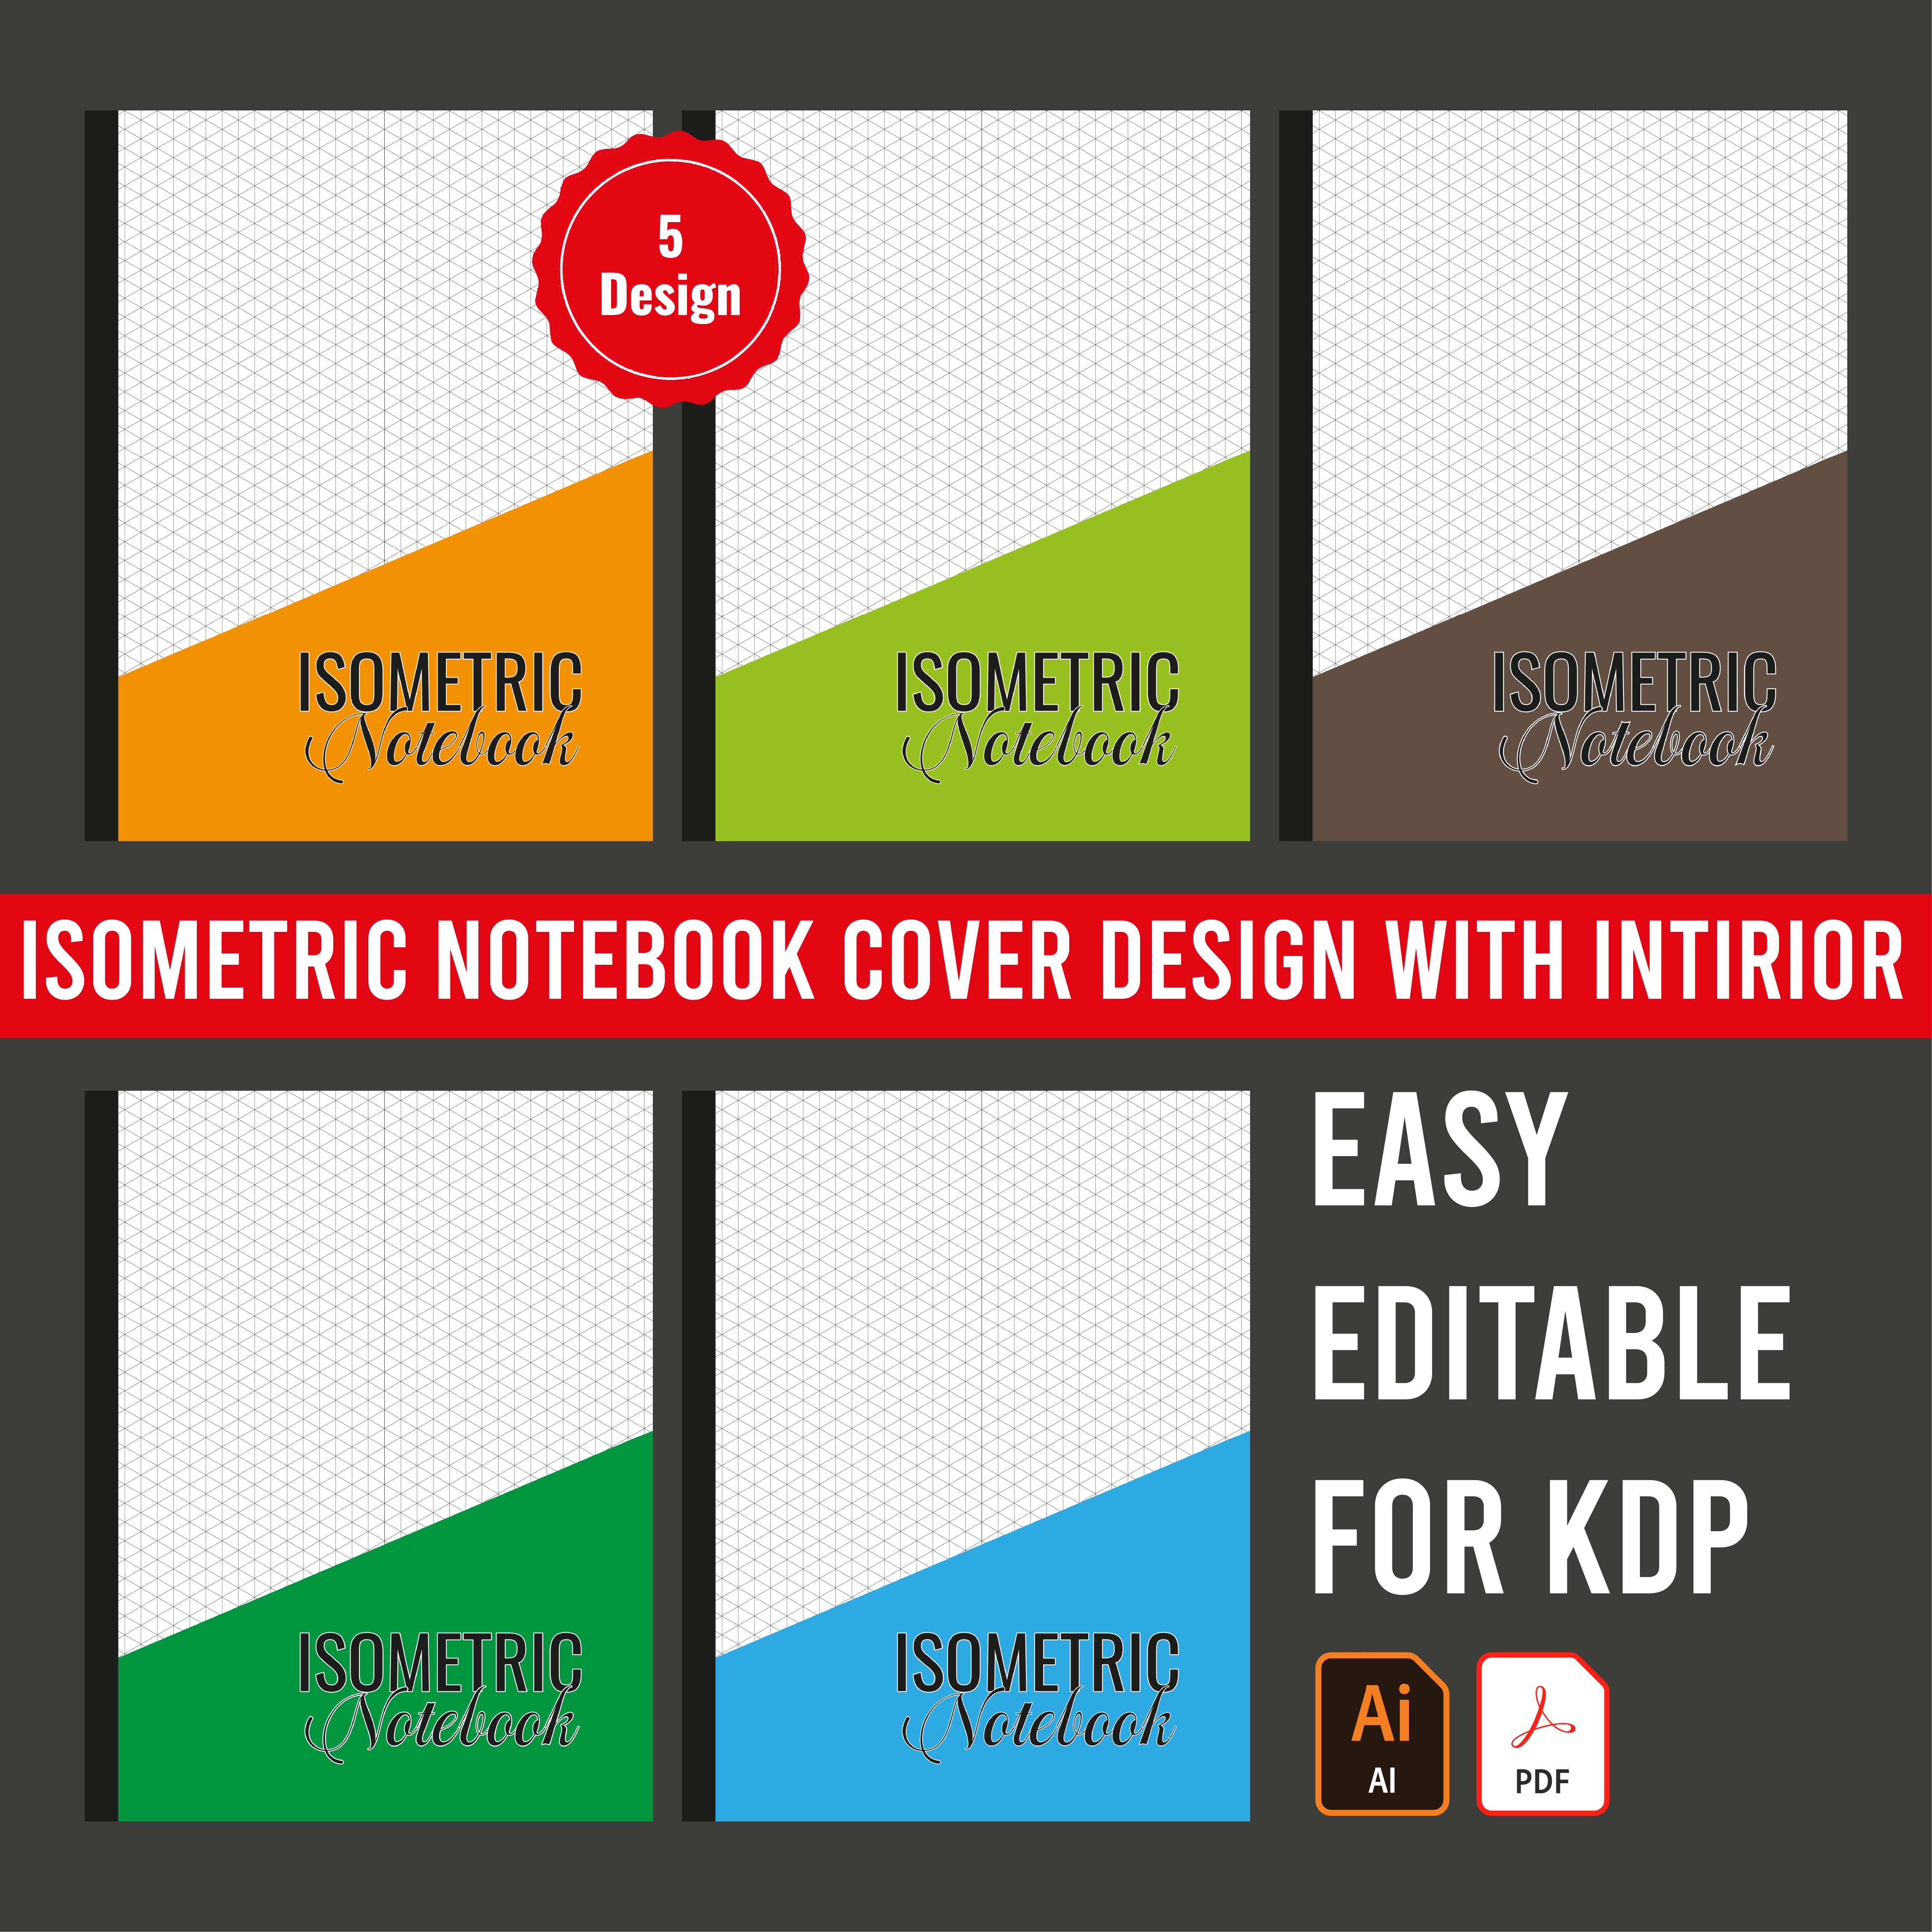 Isometric Notebook Cover Design With Interior main cover.